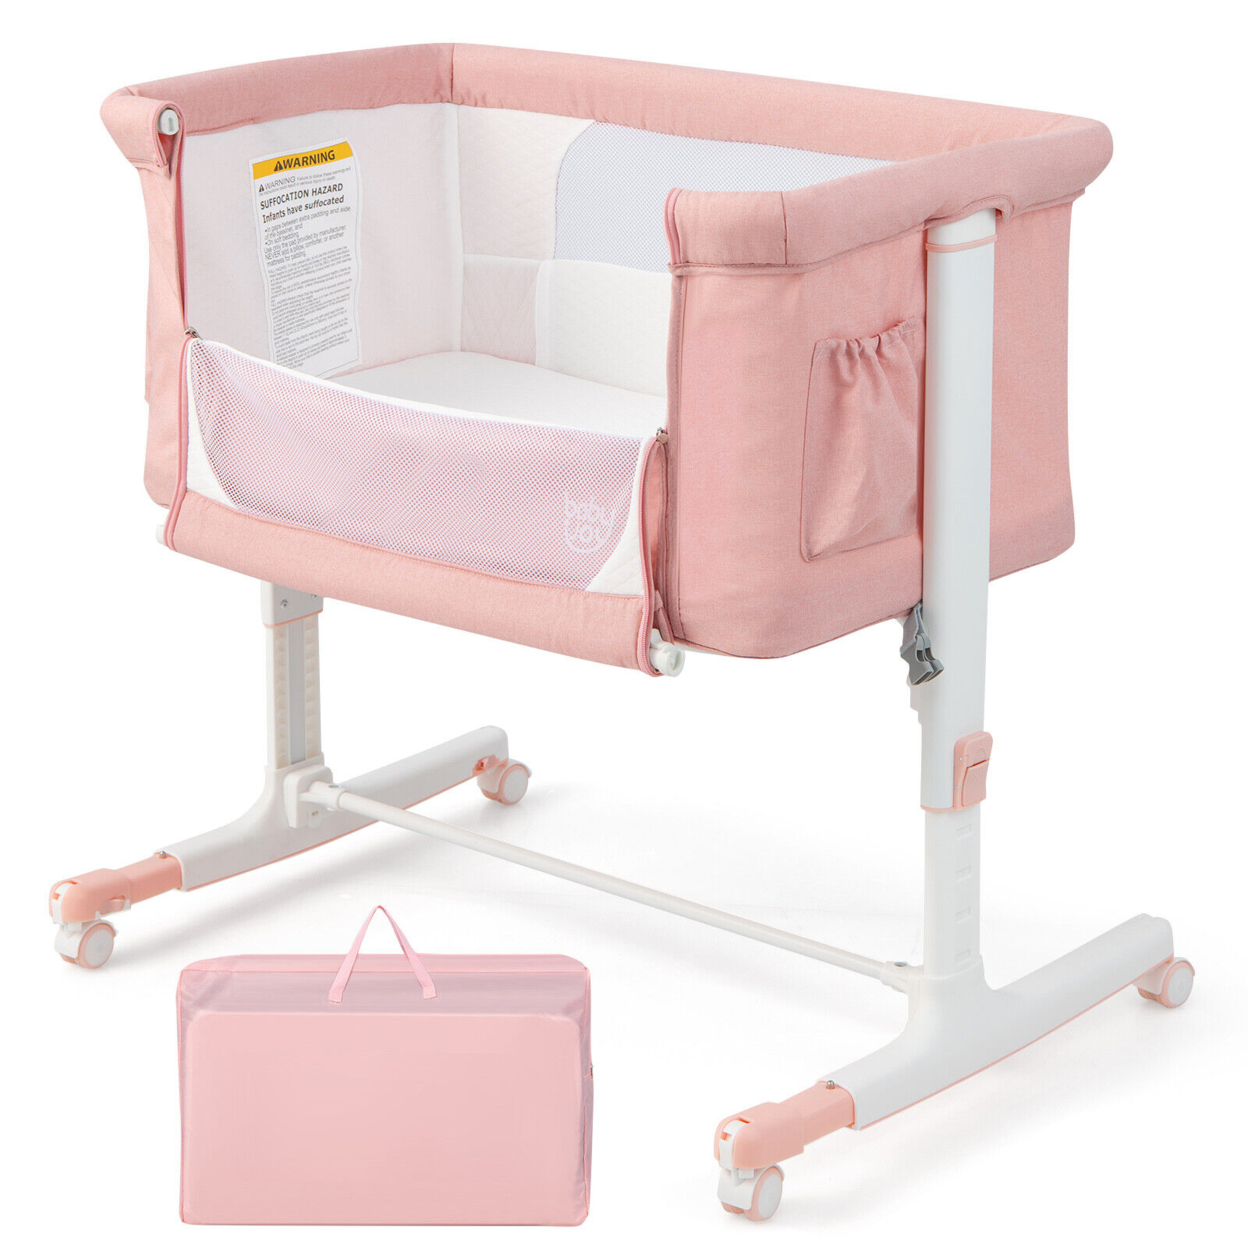 3-in-1 Baby Bassinet Beside Sleeper Crib With 5-Level Adjustable Heights - Pink